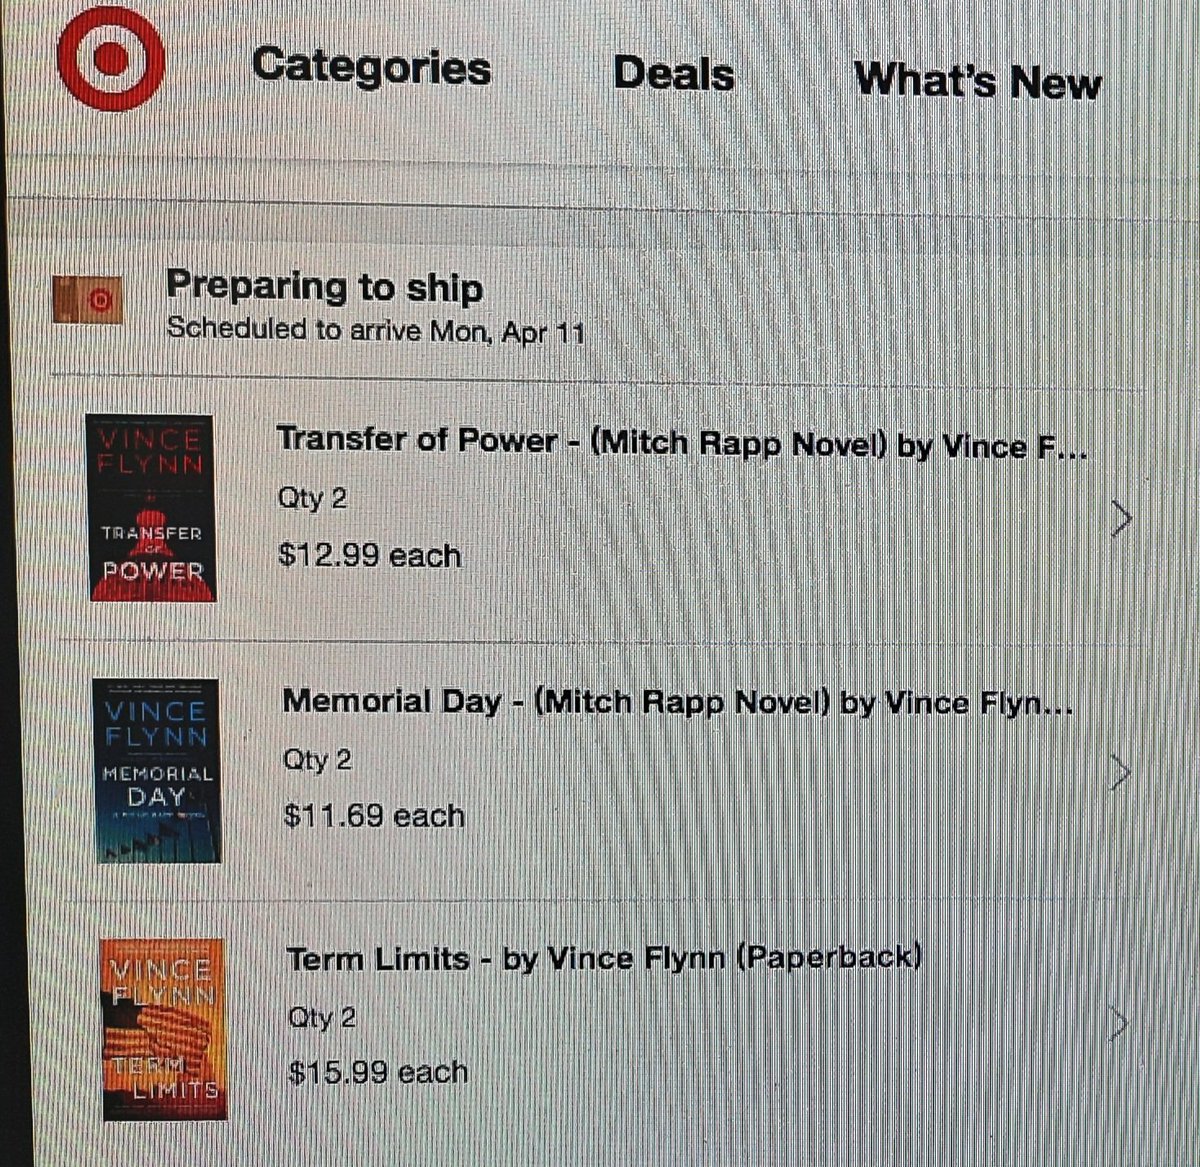 Purchased: 
2 #TermLimits 
2 #TransferOfPower and 
2 #MemorialDay
all by #VinceFlynn 

#VinceFlynnDay #MitchRapp